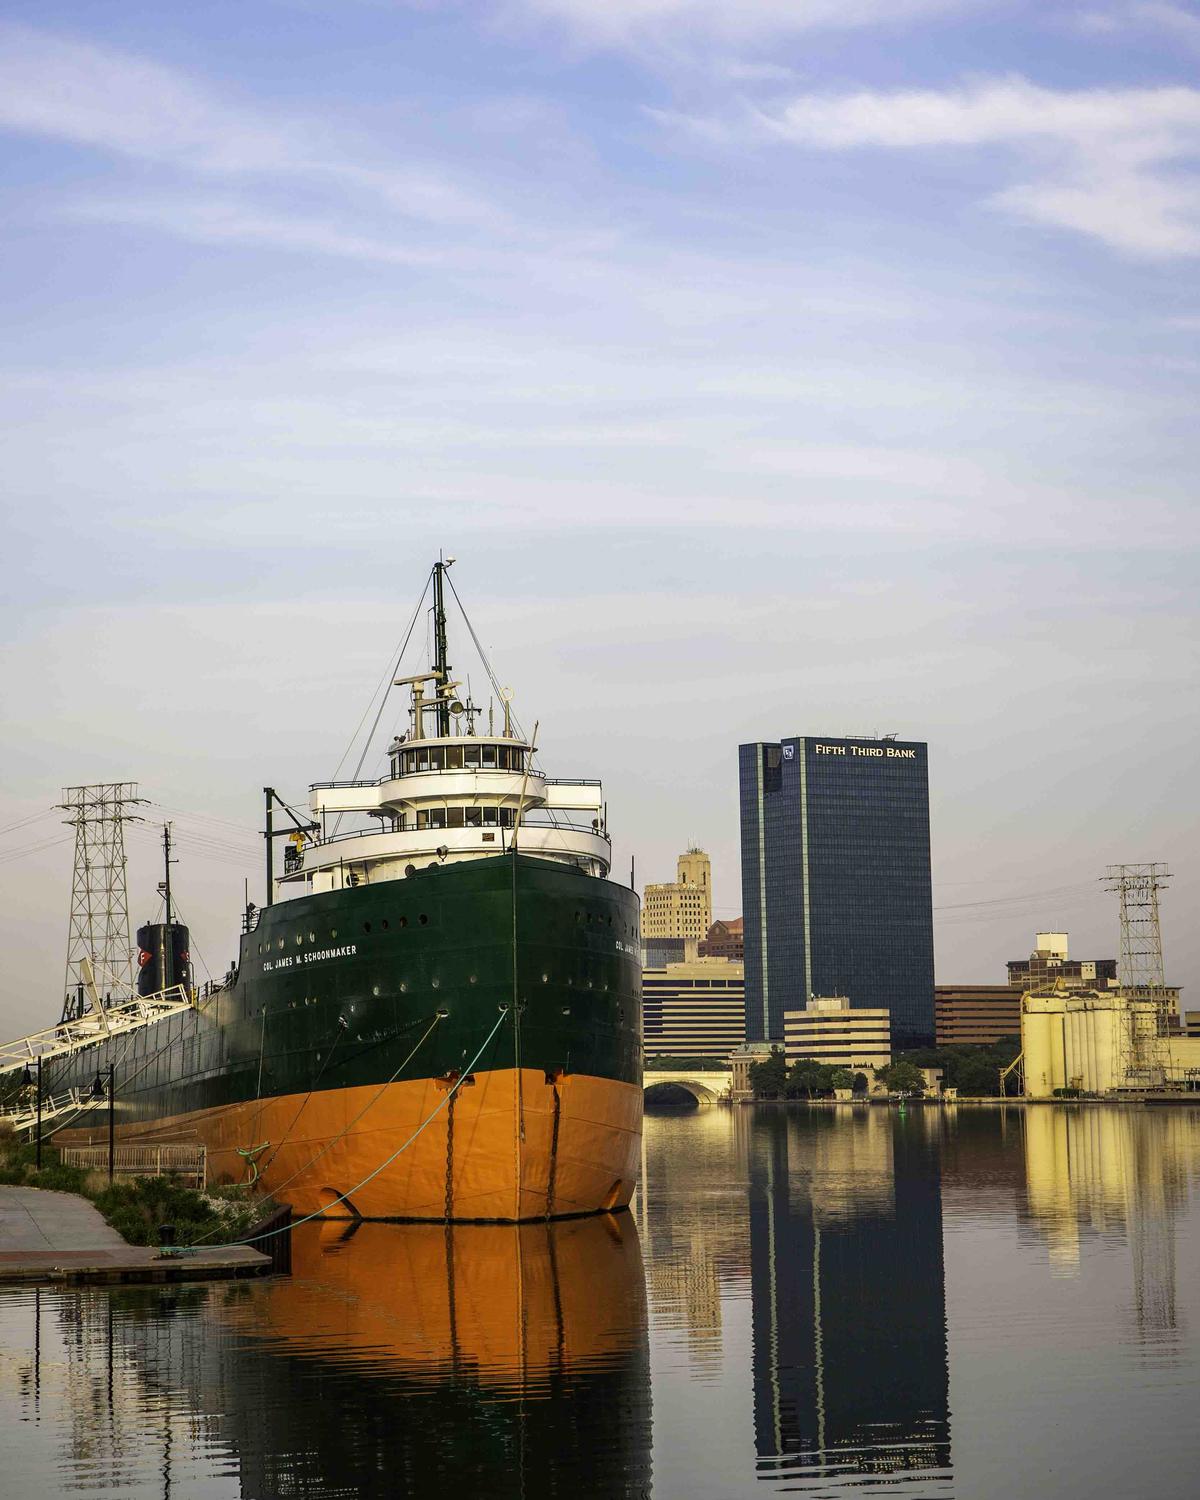 Col James Schoonmaker Cargo Ship rests at Toledo`s National Musum of the Great Lakes. (Dreamstime/TNS)